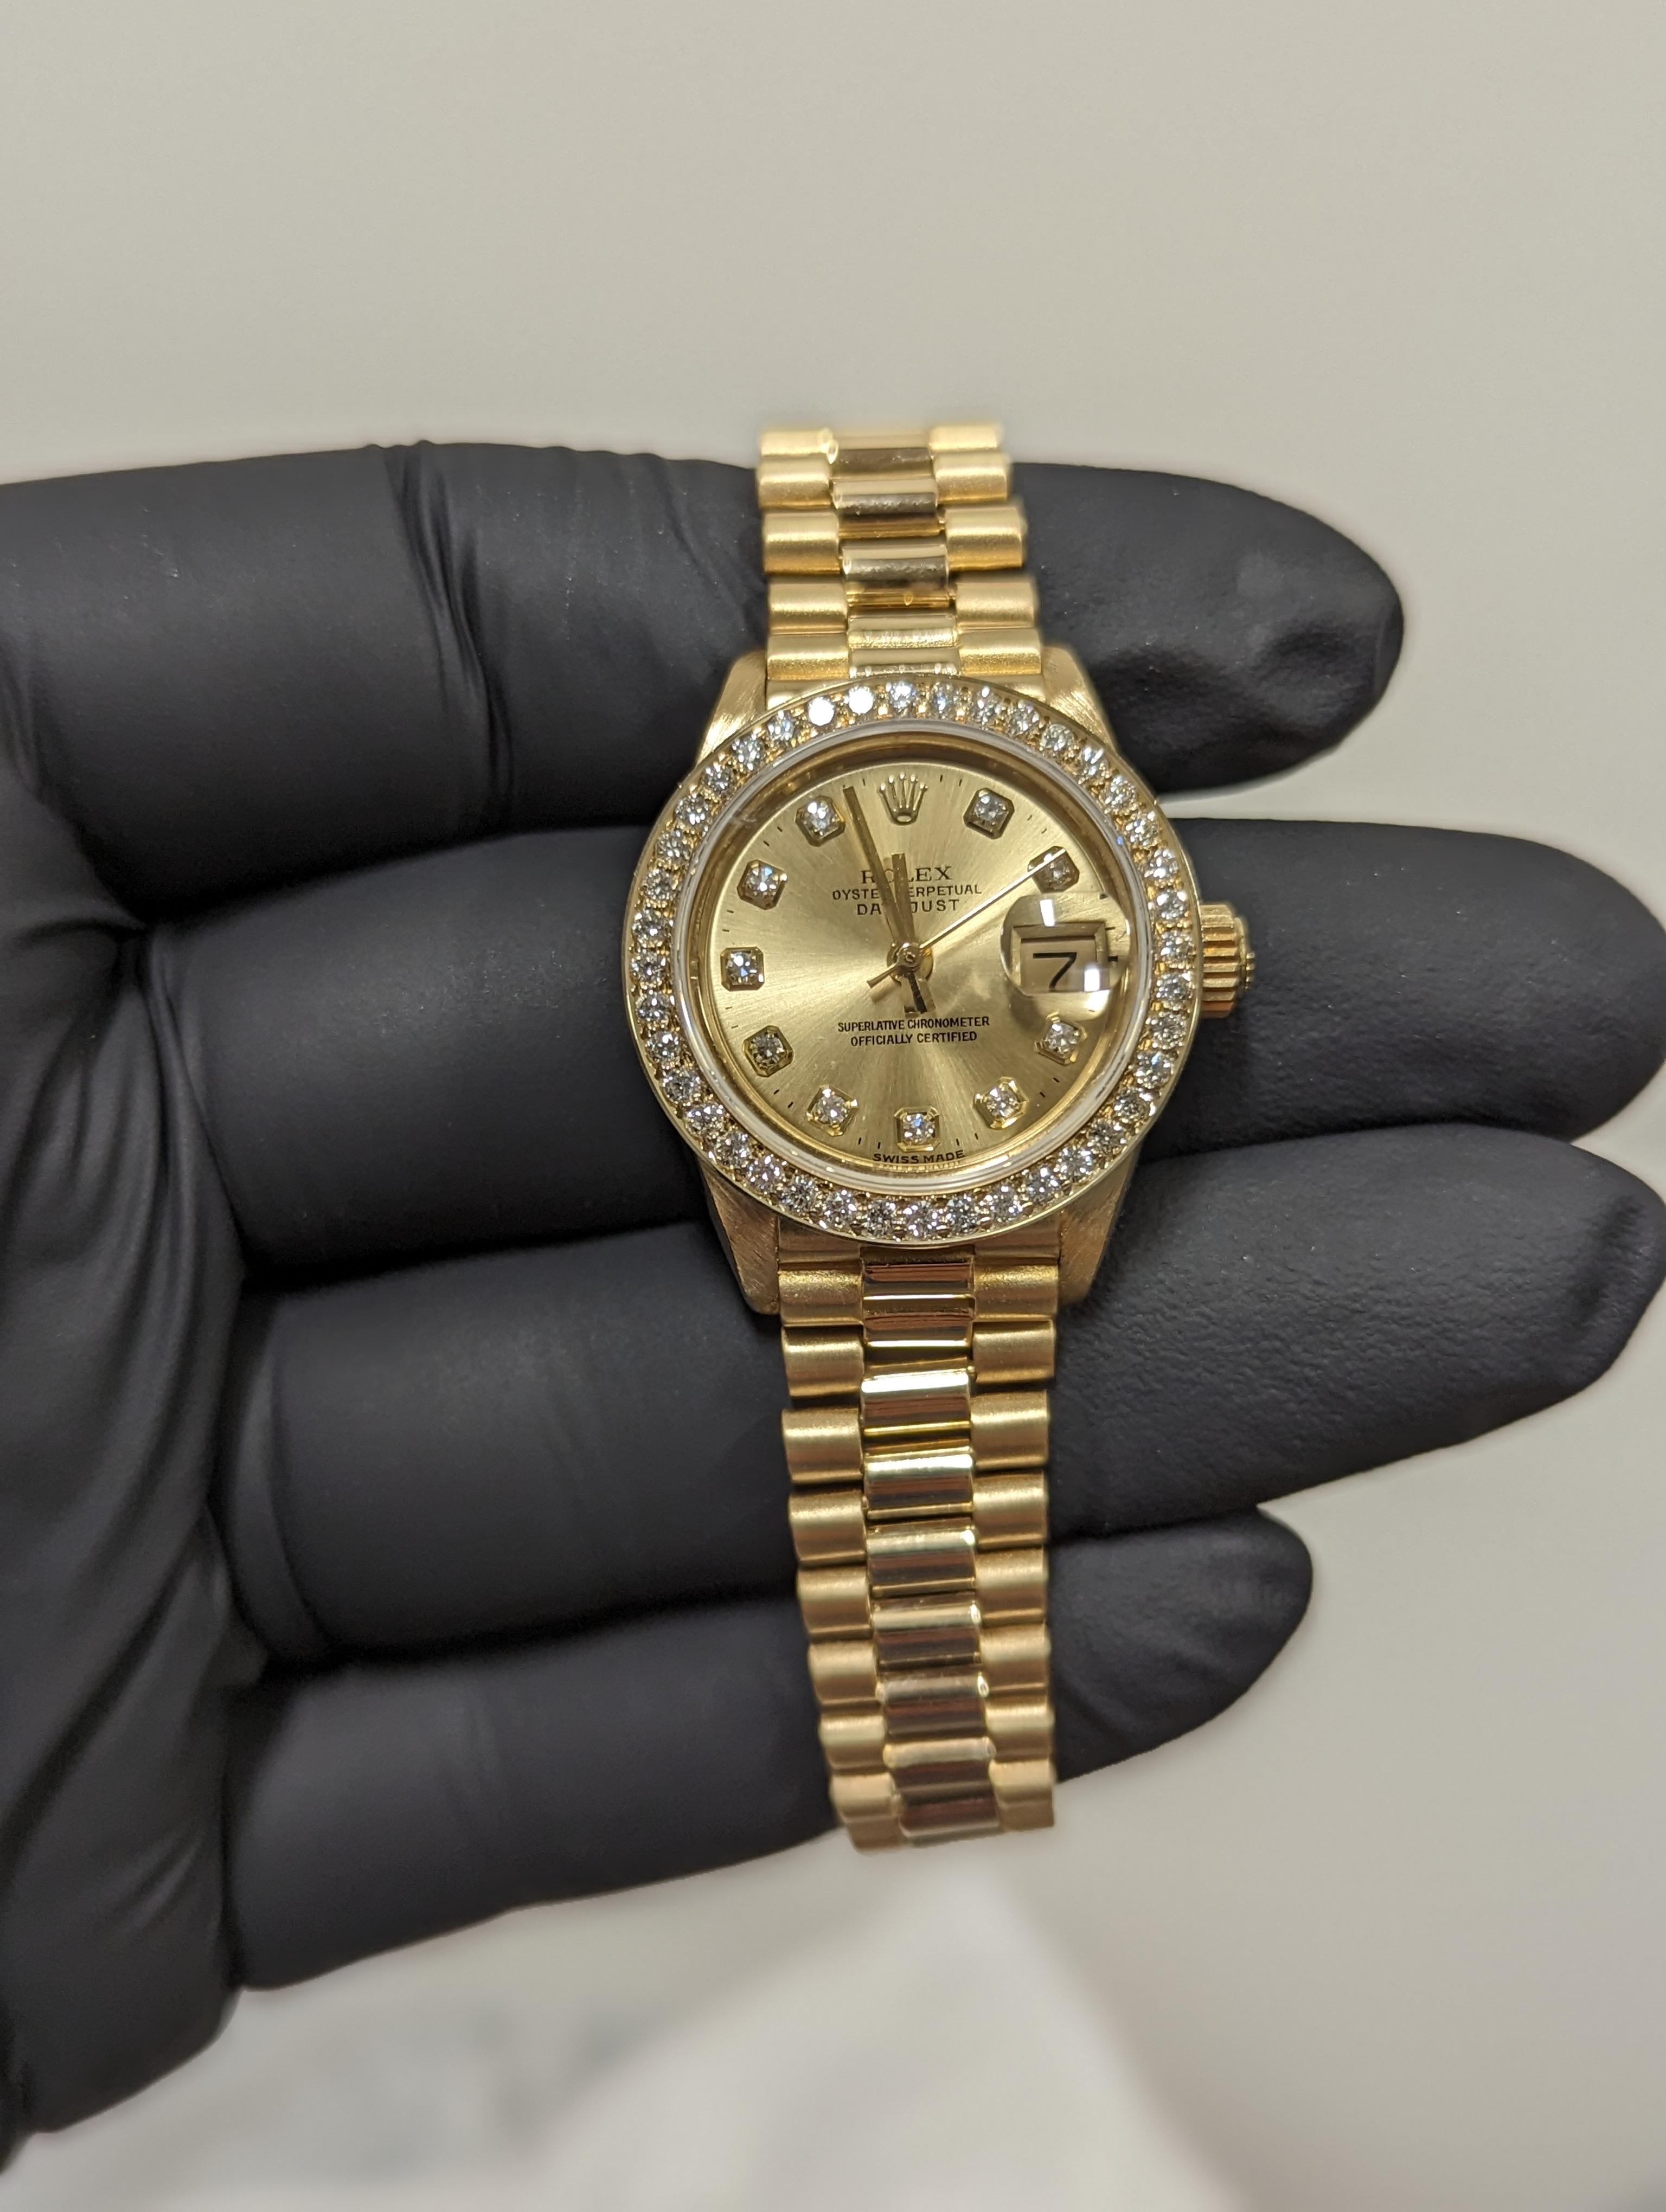 SKU 6917-YG-CHM-DIA-PRES


Brand/Model:        Rolex President 
Model Number:        6917
Style:        Ladies
Case Size:        26 mm
Material:        18K Yellow Gold 
Dial:        Original Rolex Champagne Diamond Dial 
Bezel:        Custom 1ct